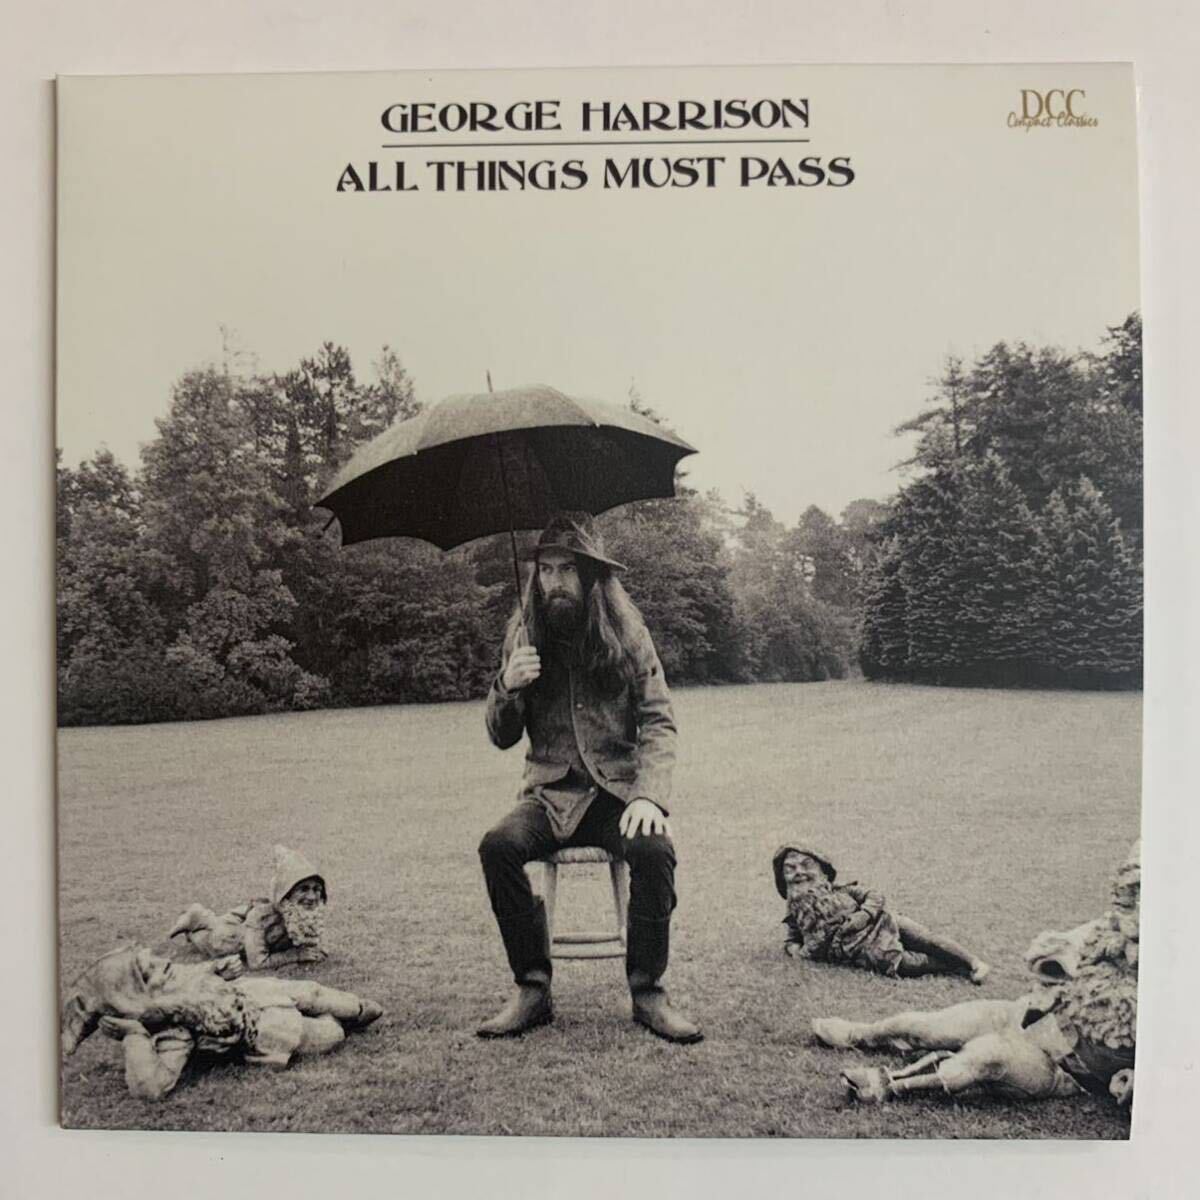 GEORGE HARRISON / ALL THINGS MUST PASS DCC COMPACT CLASSICS Remastered by Steve Hoffman (CD) これは嬉しい紙ジャケット仕様★_画像2